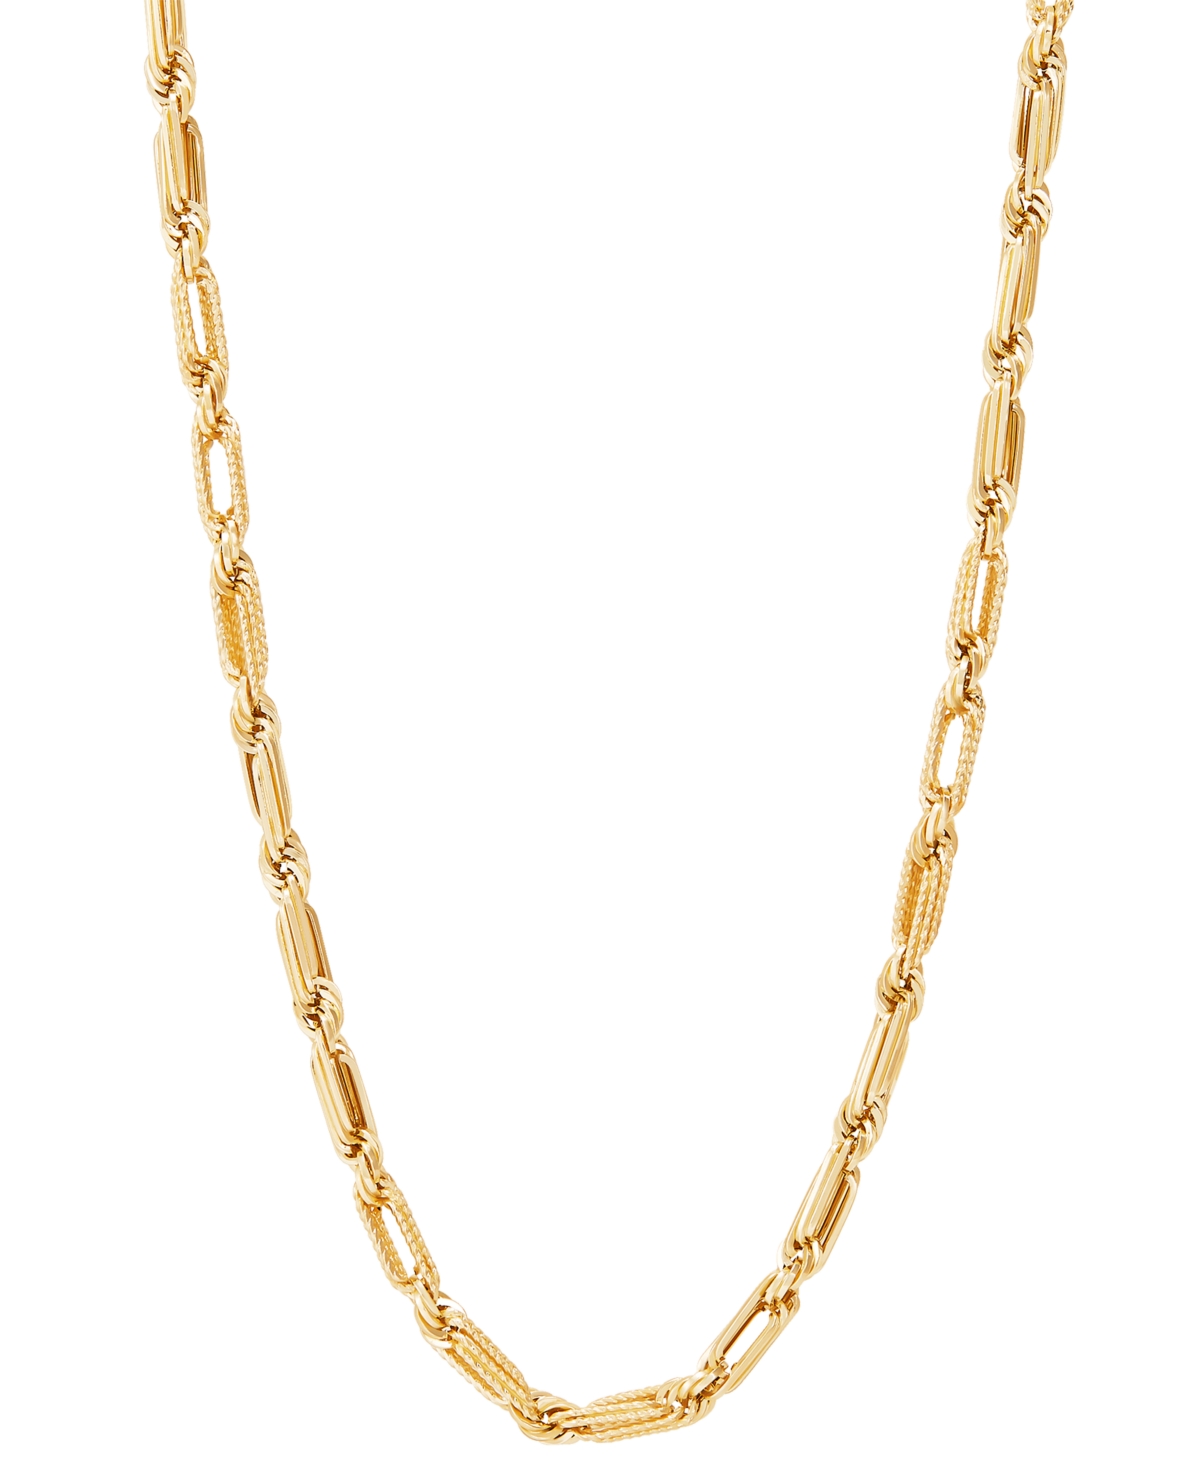 Macy's Polished Double Link Chain Necklace In 14k Yellow Gold, 18"